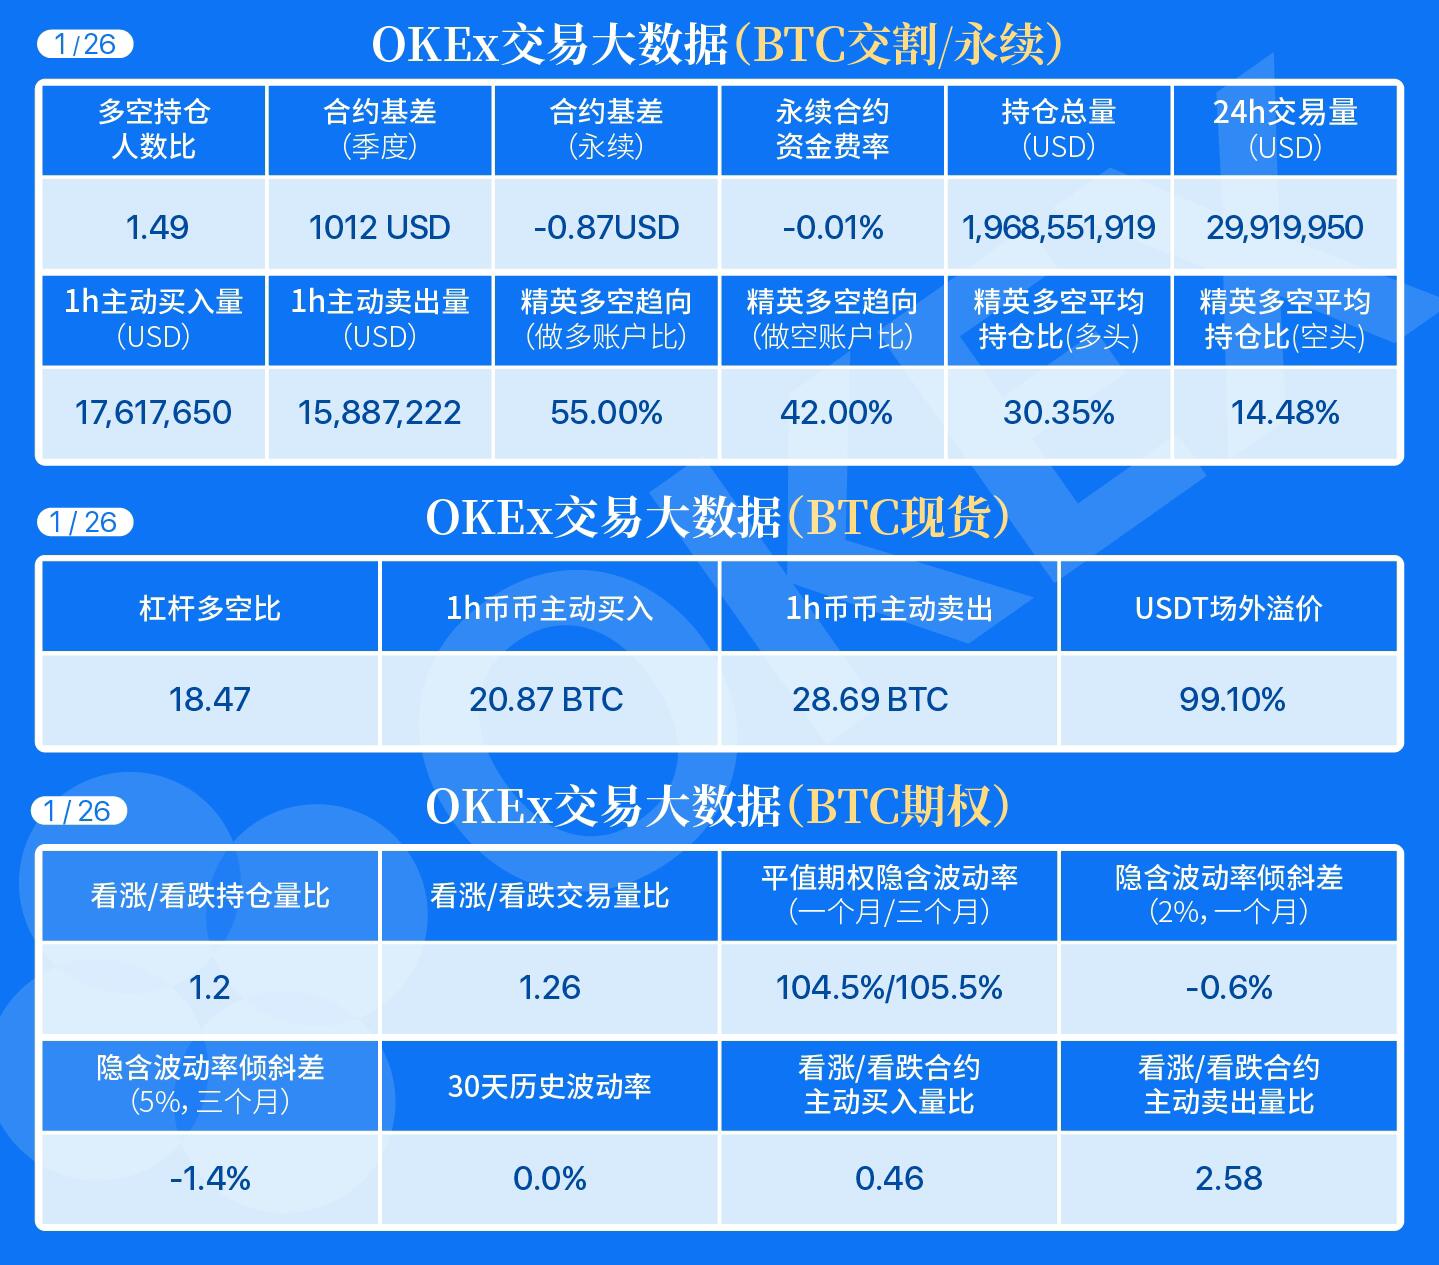 OKEx Big Market Data: The ratio of long to short positions in the BTC contract is 1.49, and the total contract value is $ 1.96 billion.